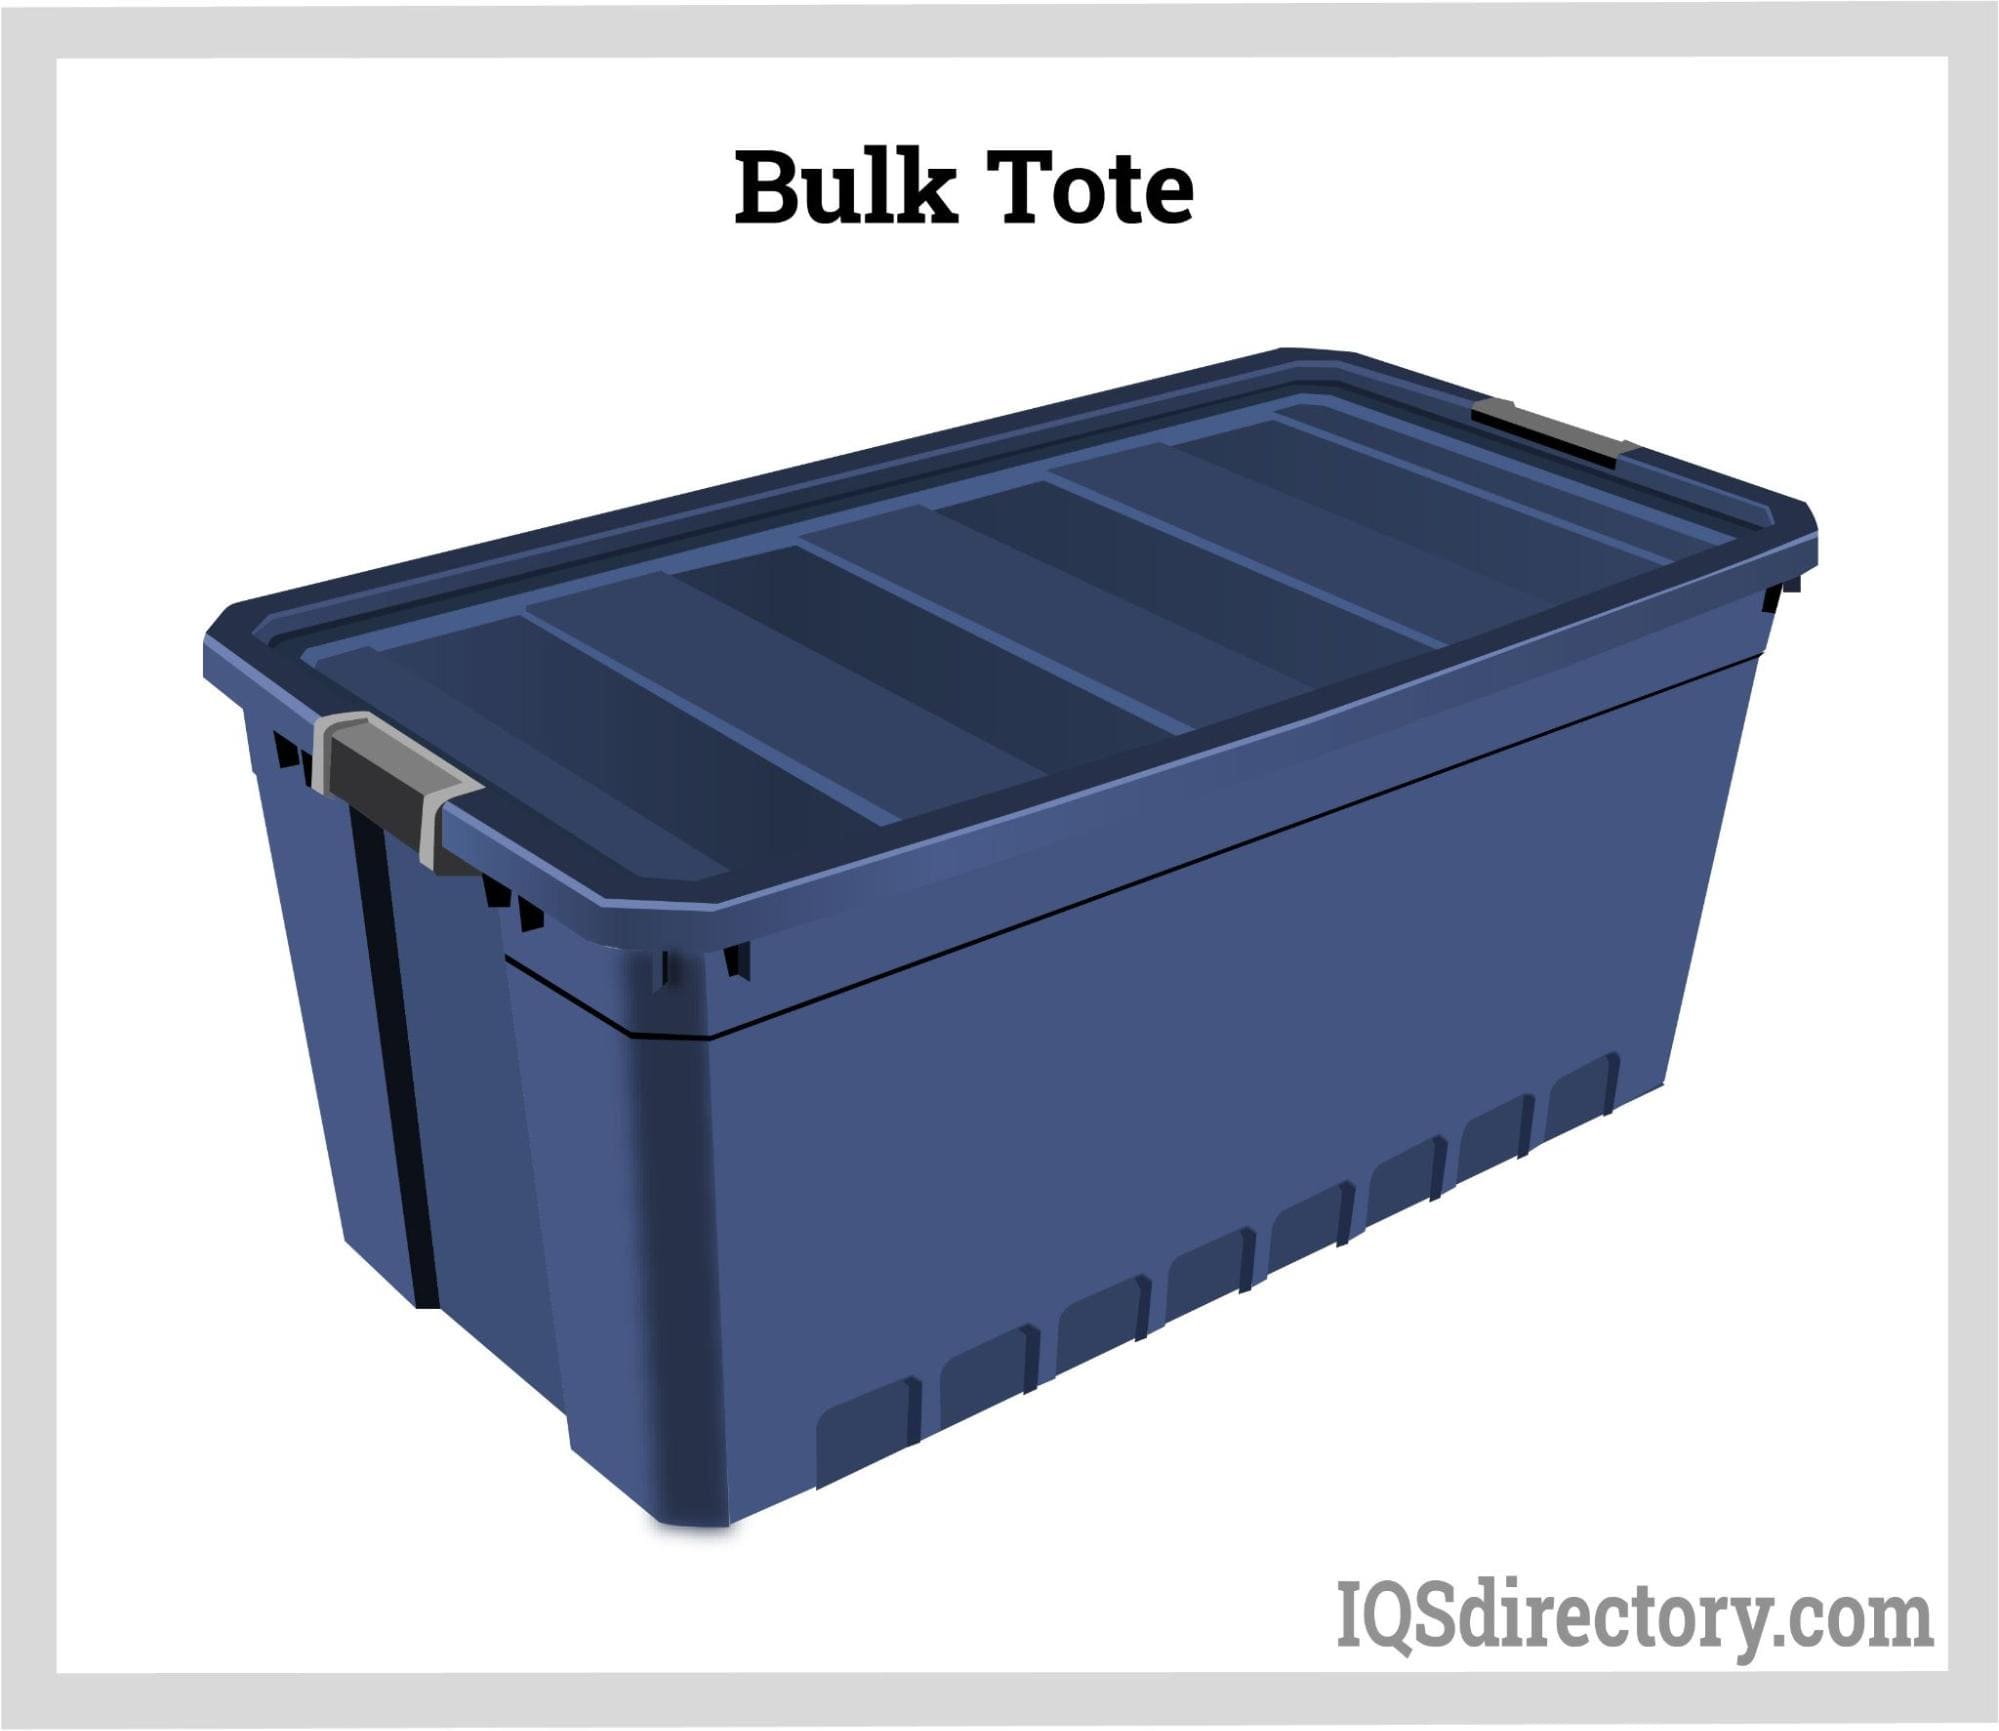 https://www.plastic-containers.net/wp-content/uploads/2023/02/bulk-tote.jpg